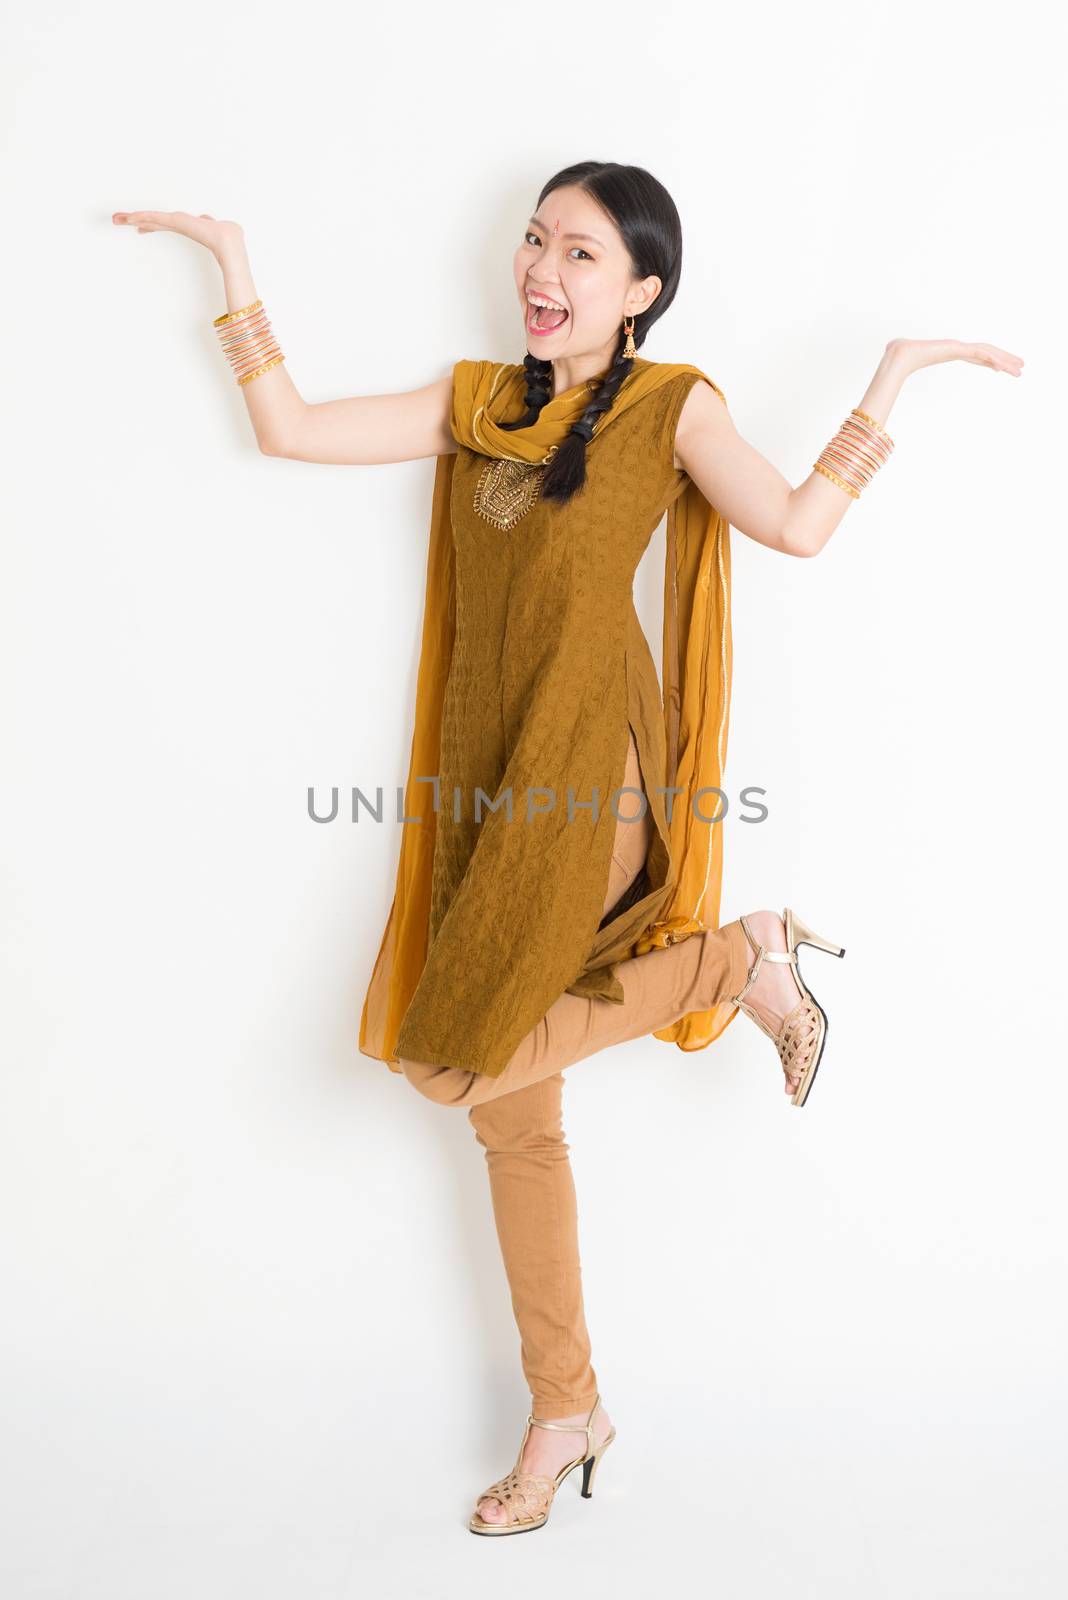 Portrait of excited mixed race Indian Chinese woman in traditional punjabi dress palms showing something, full length standing on plain white background.